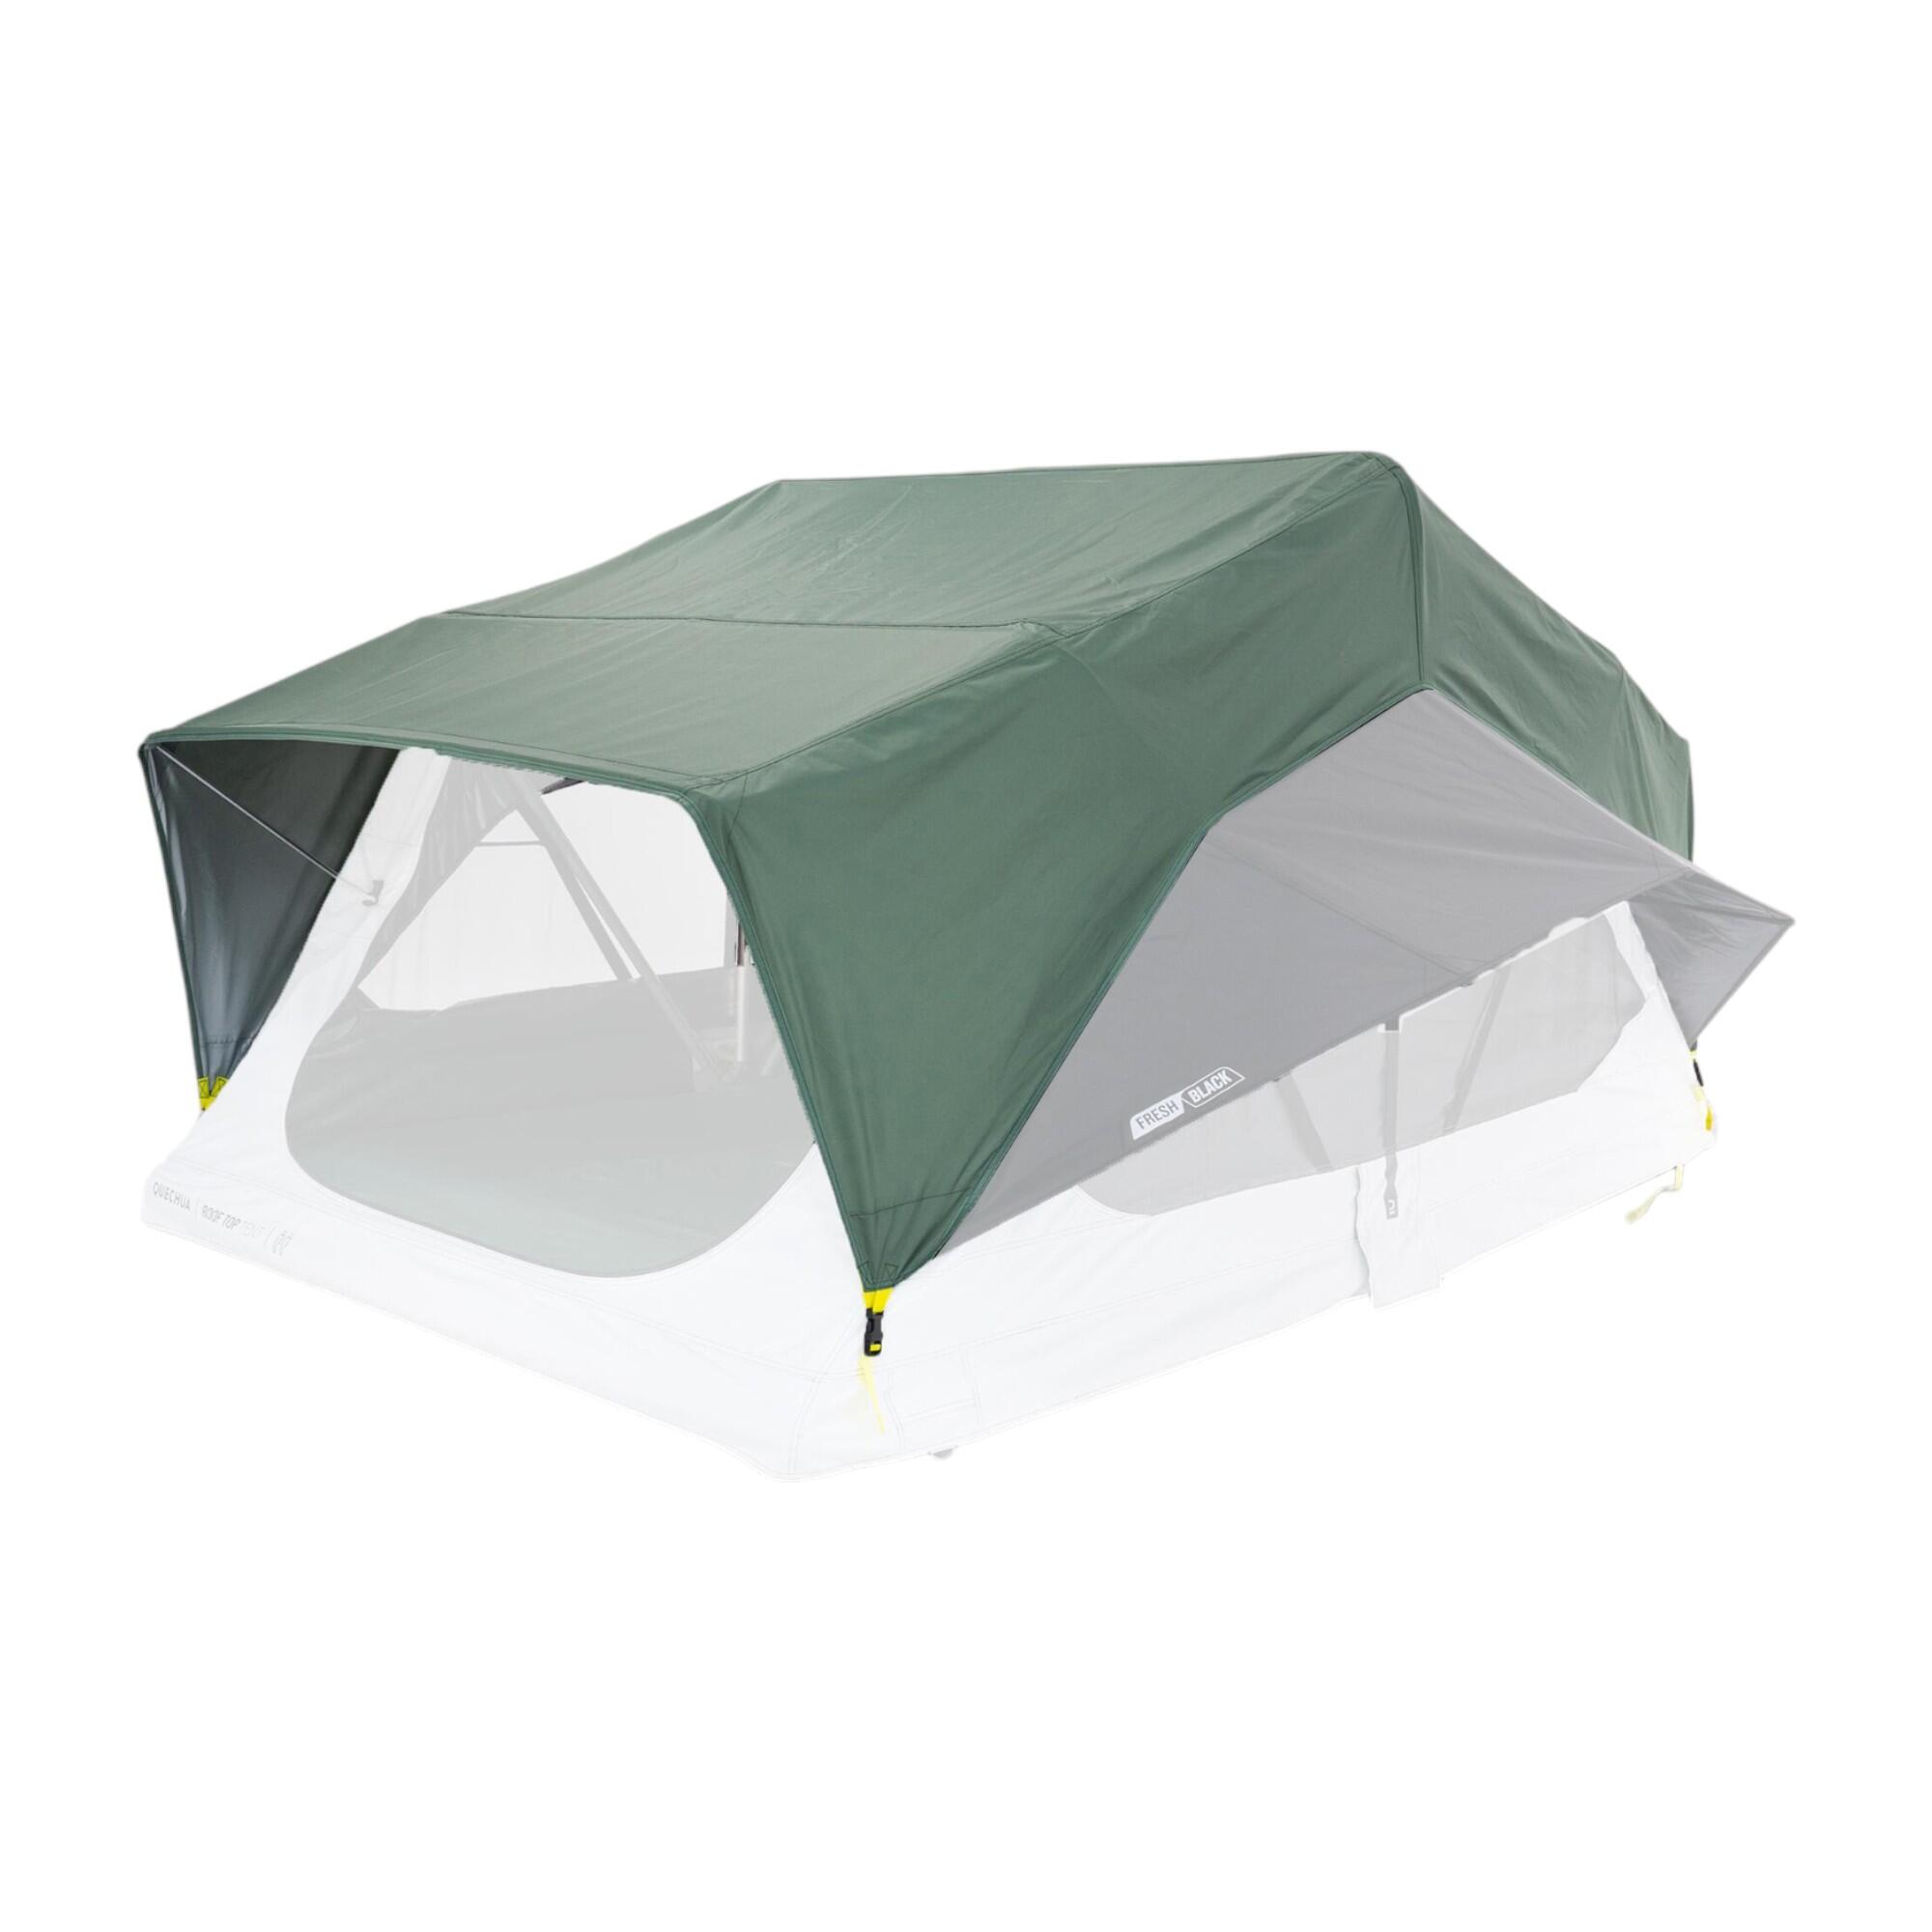 Roof Tent Spare Parts